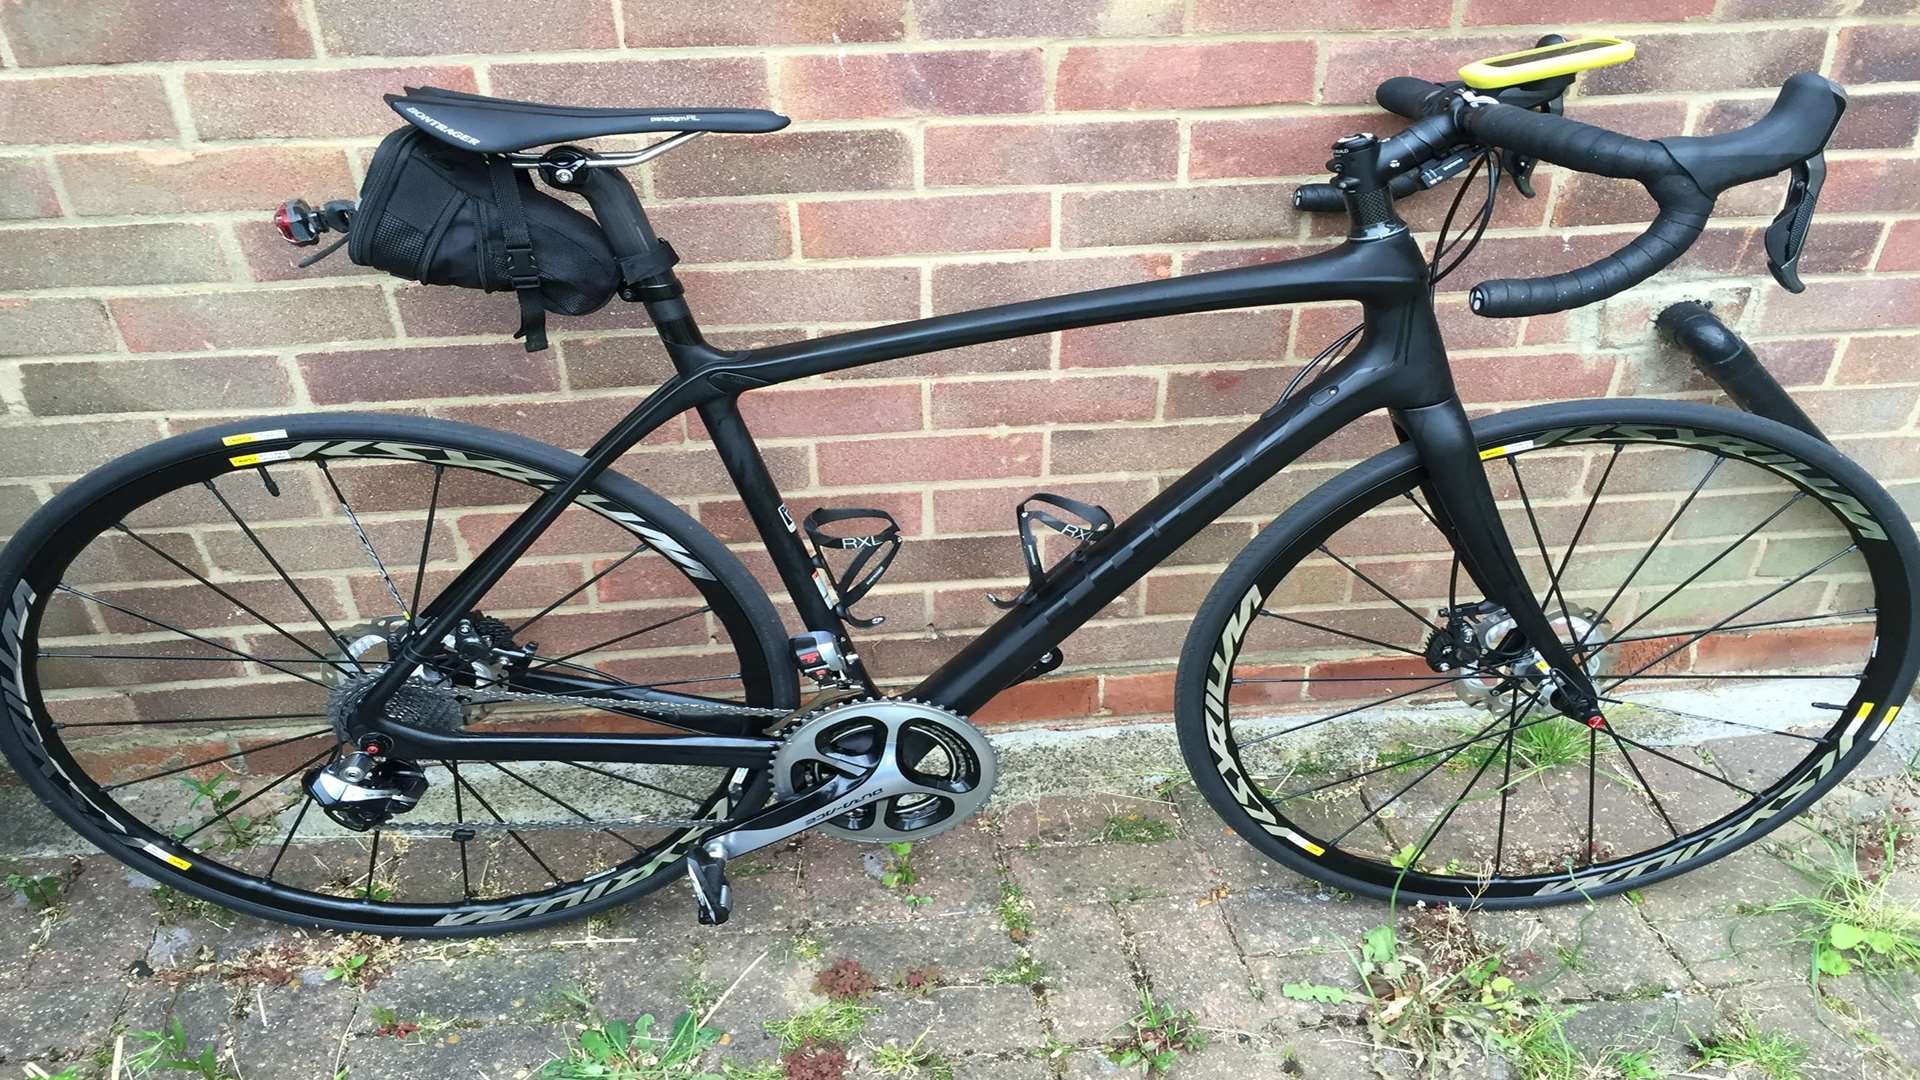 The Trek Domane road bike was stolen during a burglary, at a property in Quincewood Gardens on Wednesday, April 12